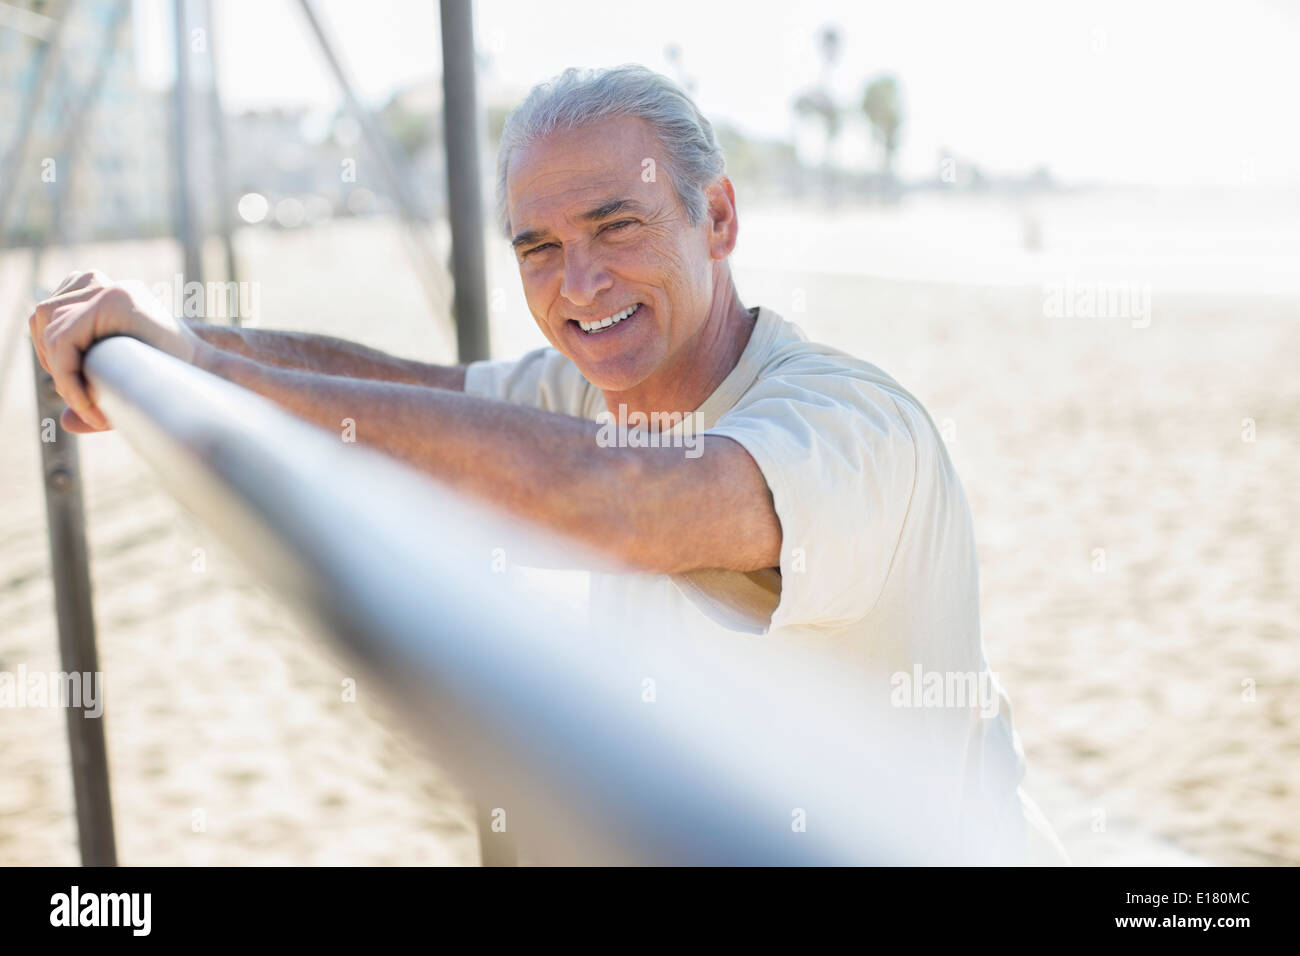 Portrait of senior man leaning on bar at beach Banque D'Images